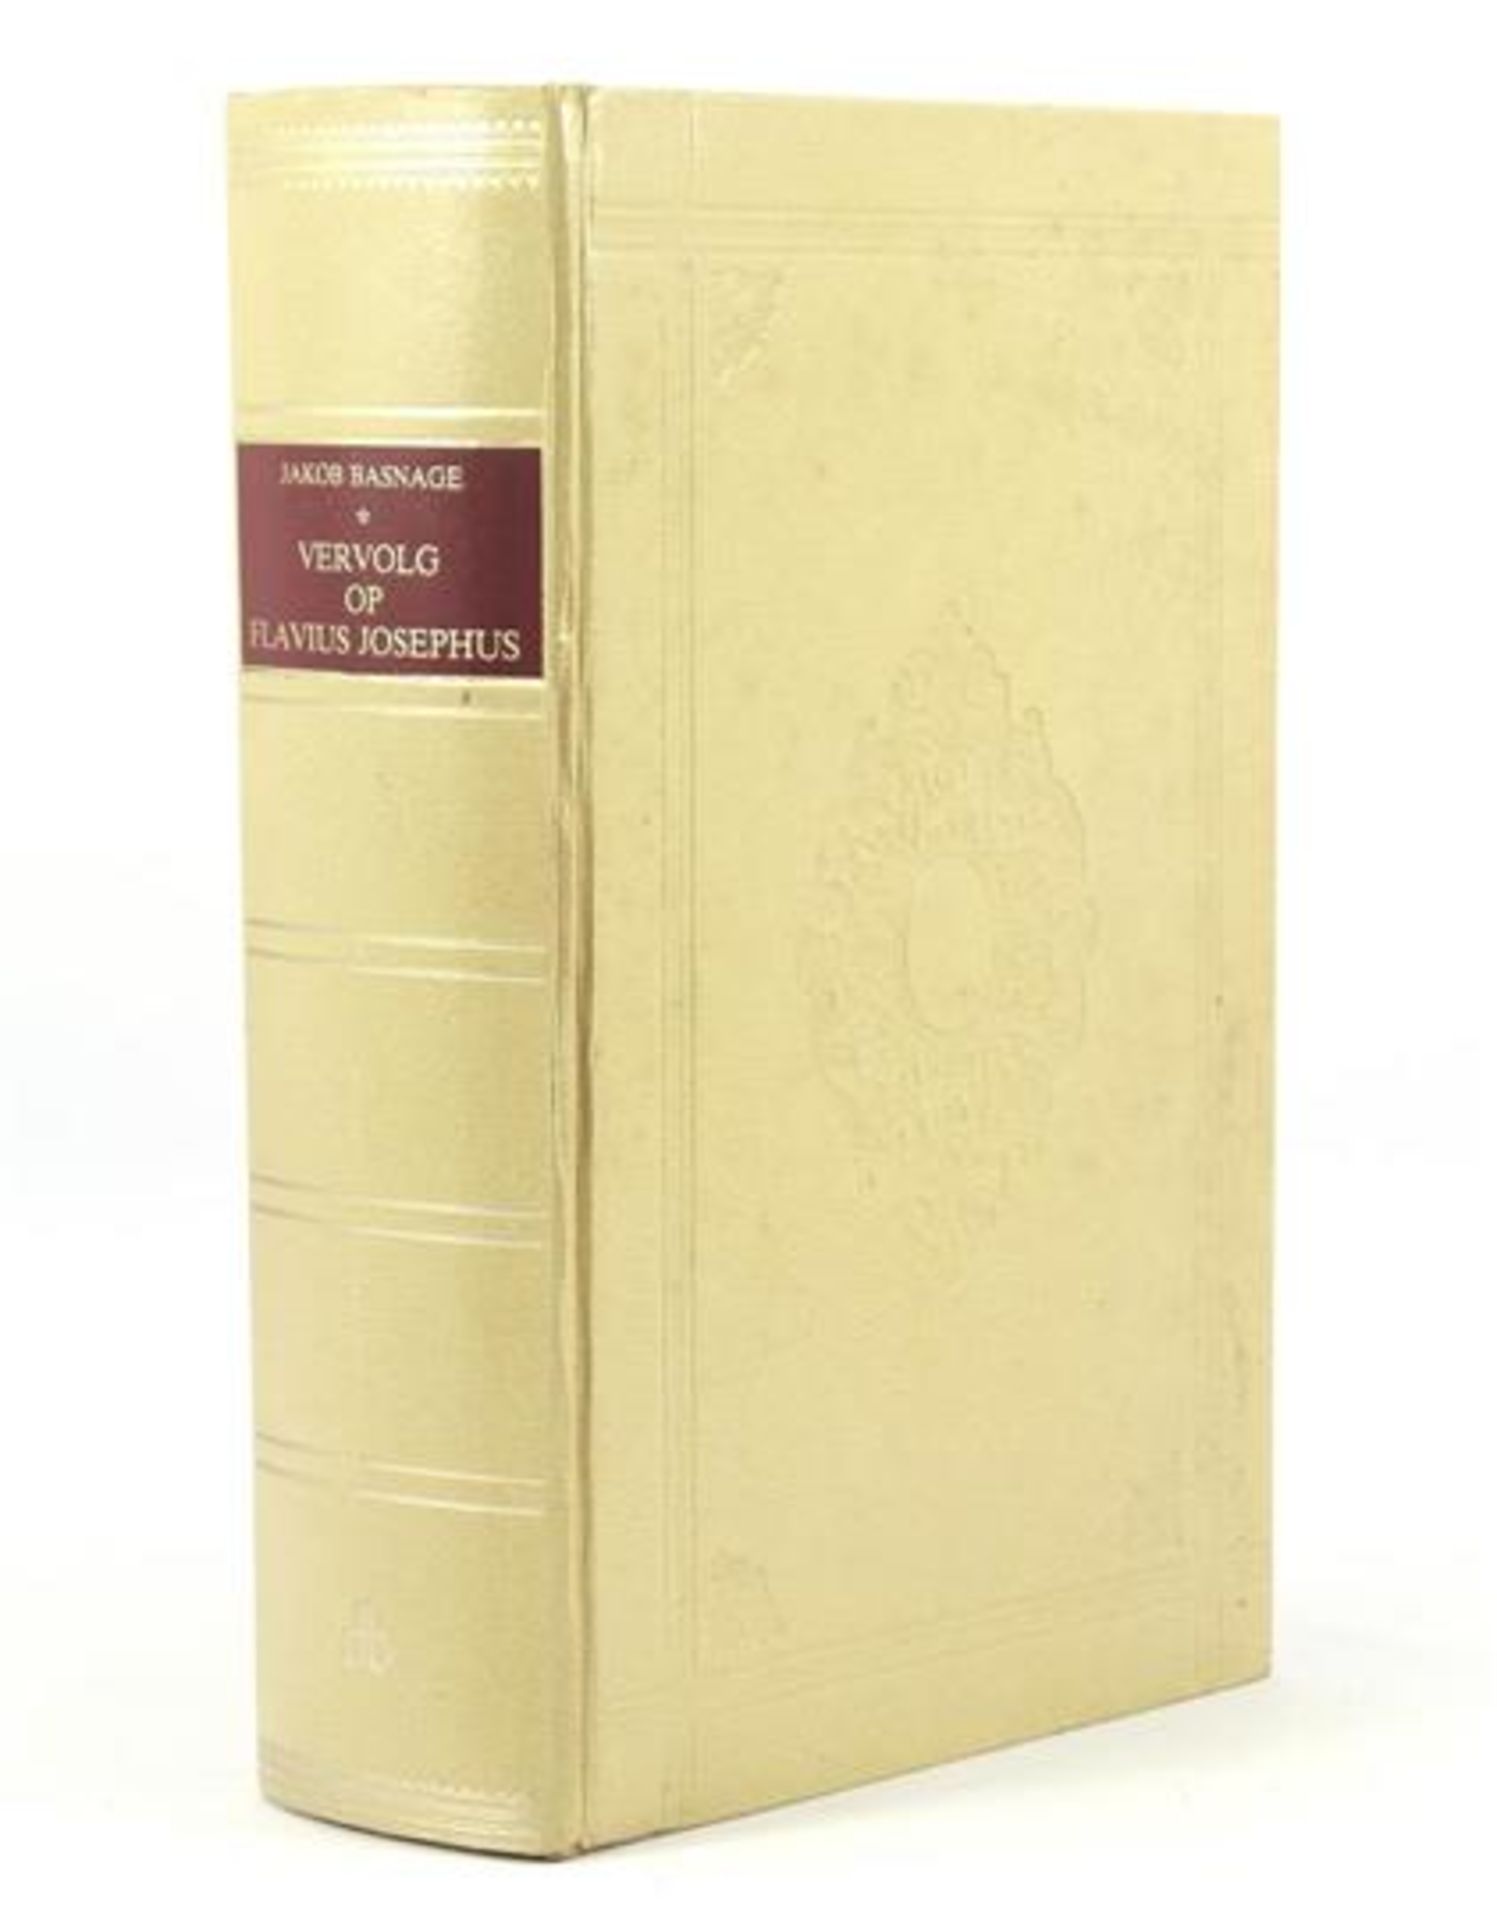 1988 reprint of the book "Sequel to Flavius Josephus by Jakob Basnage & nbsp; from 1726"